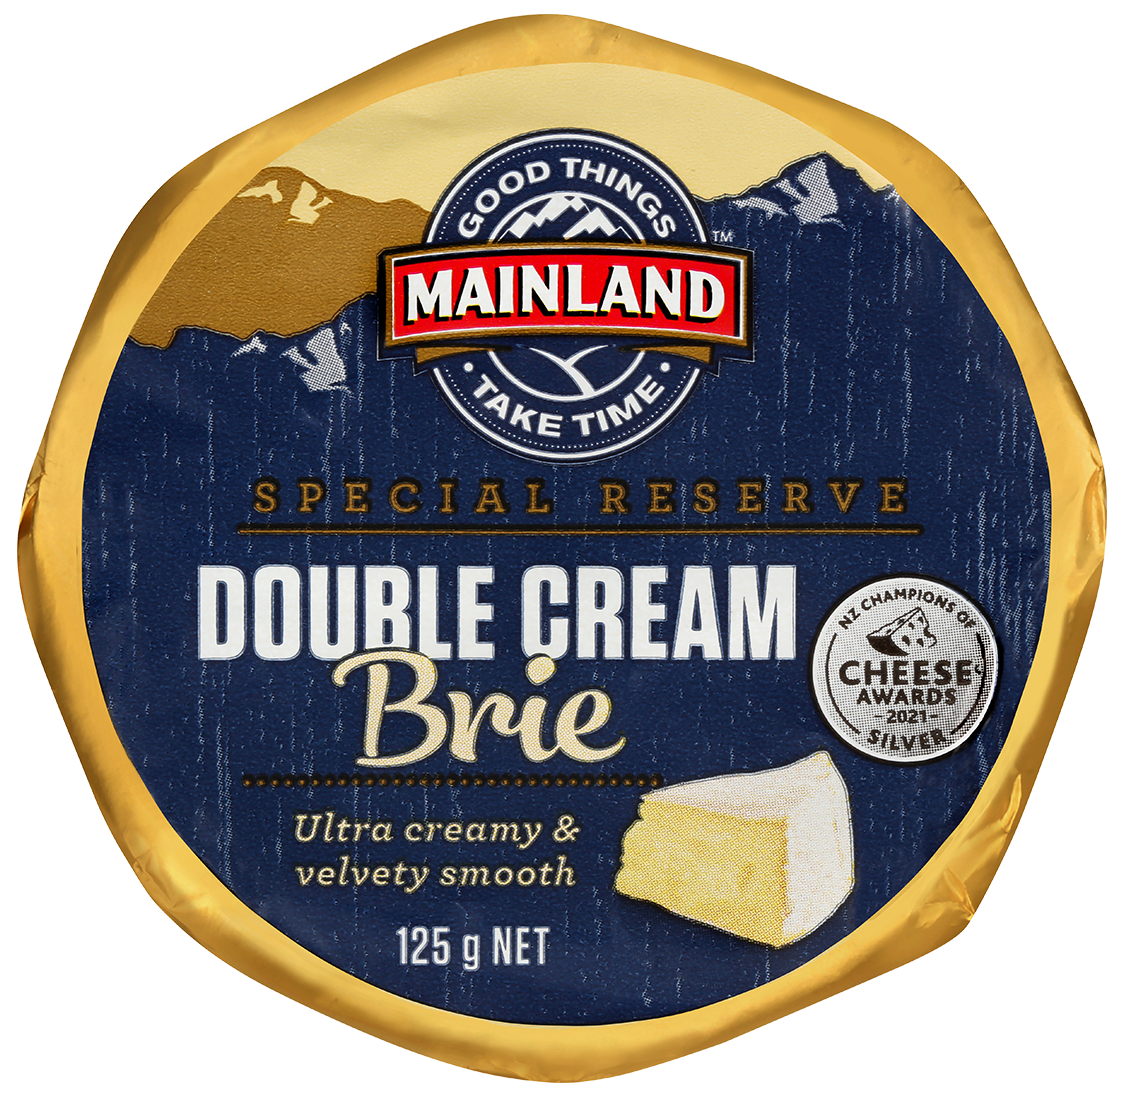 Mainland Special Reserve Double Cream Brie Cheese 125g*